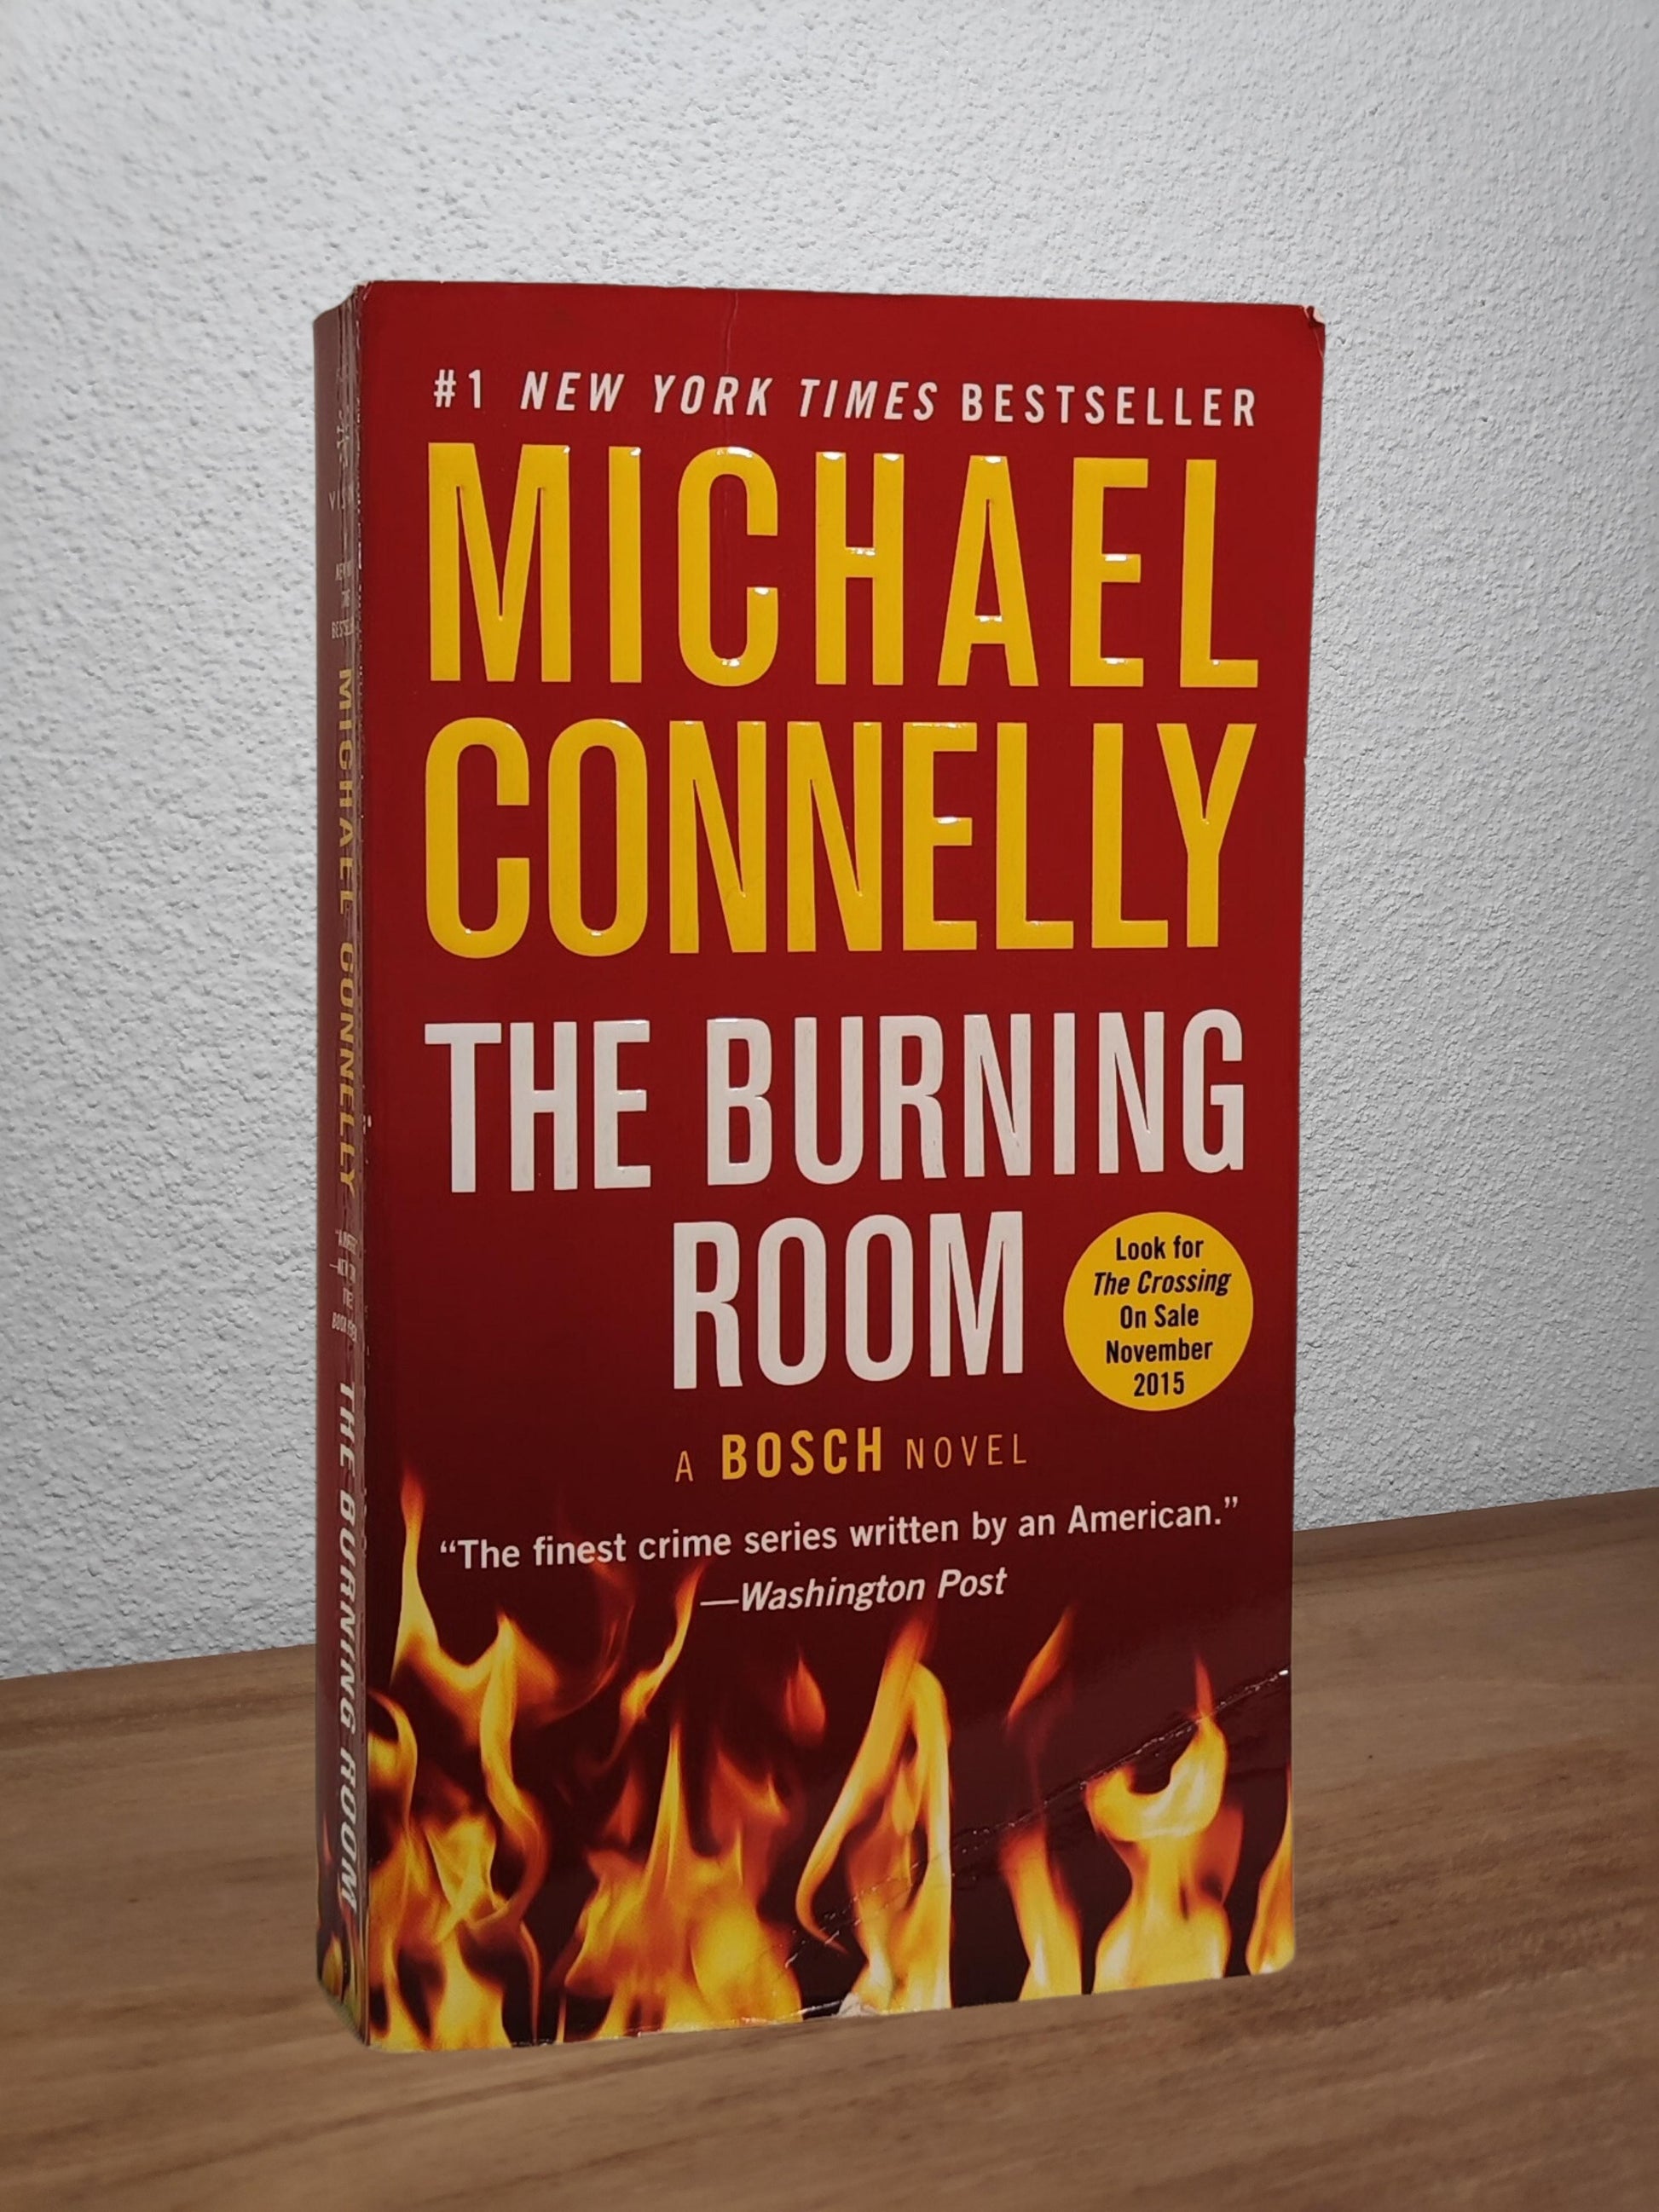 Micheal Connelly - The Burning Room  - Second-hand english book to deliver in Zurich & Switzerland